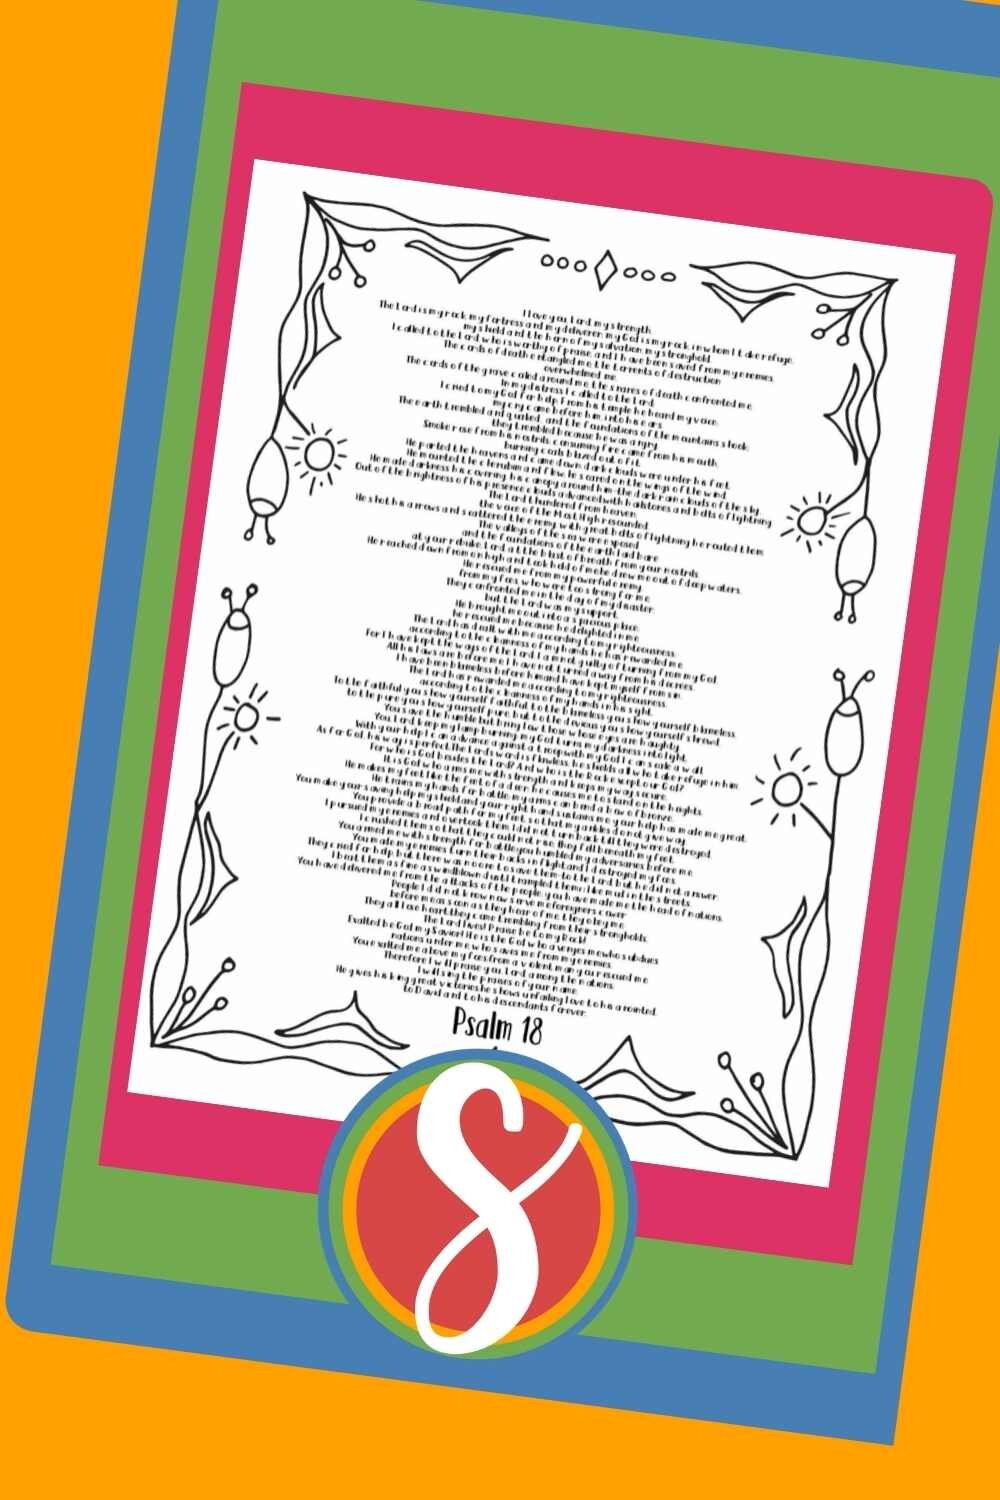 Free Psalm 19 coloring page from Stevie Doodles - a page for every psalm